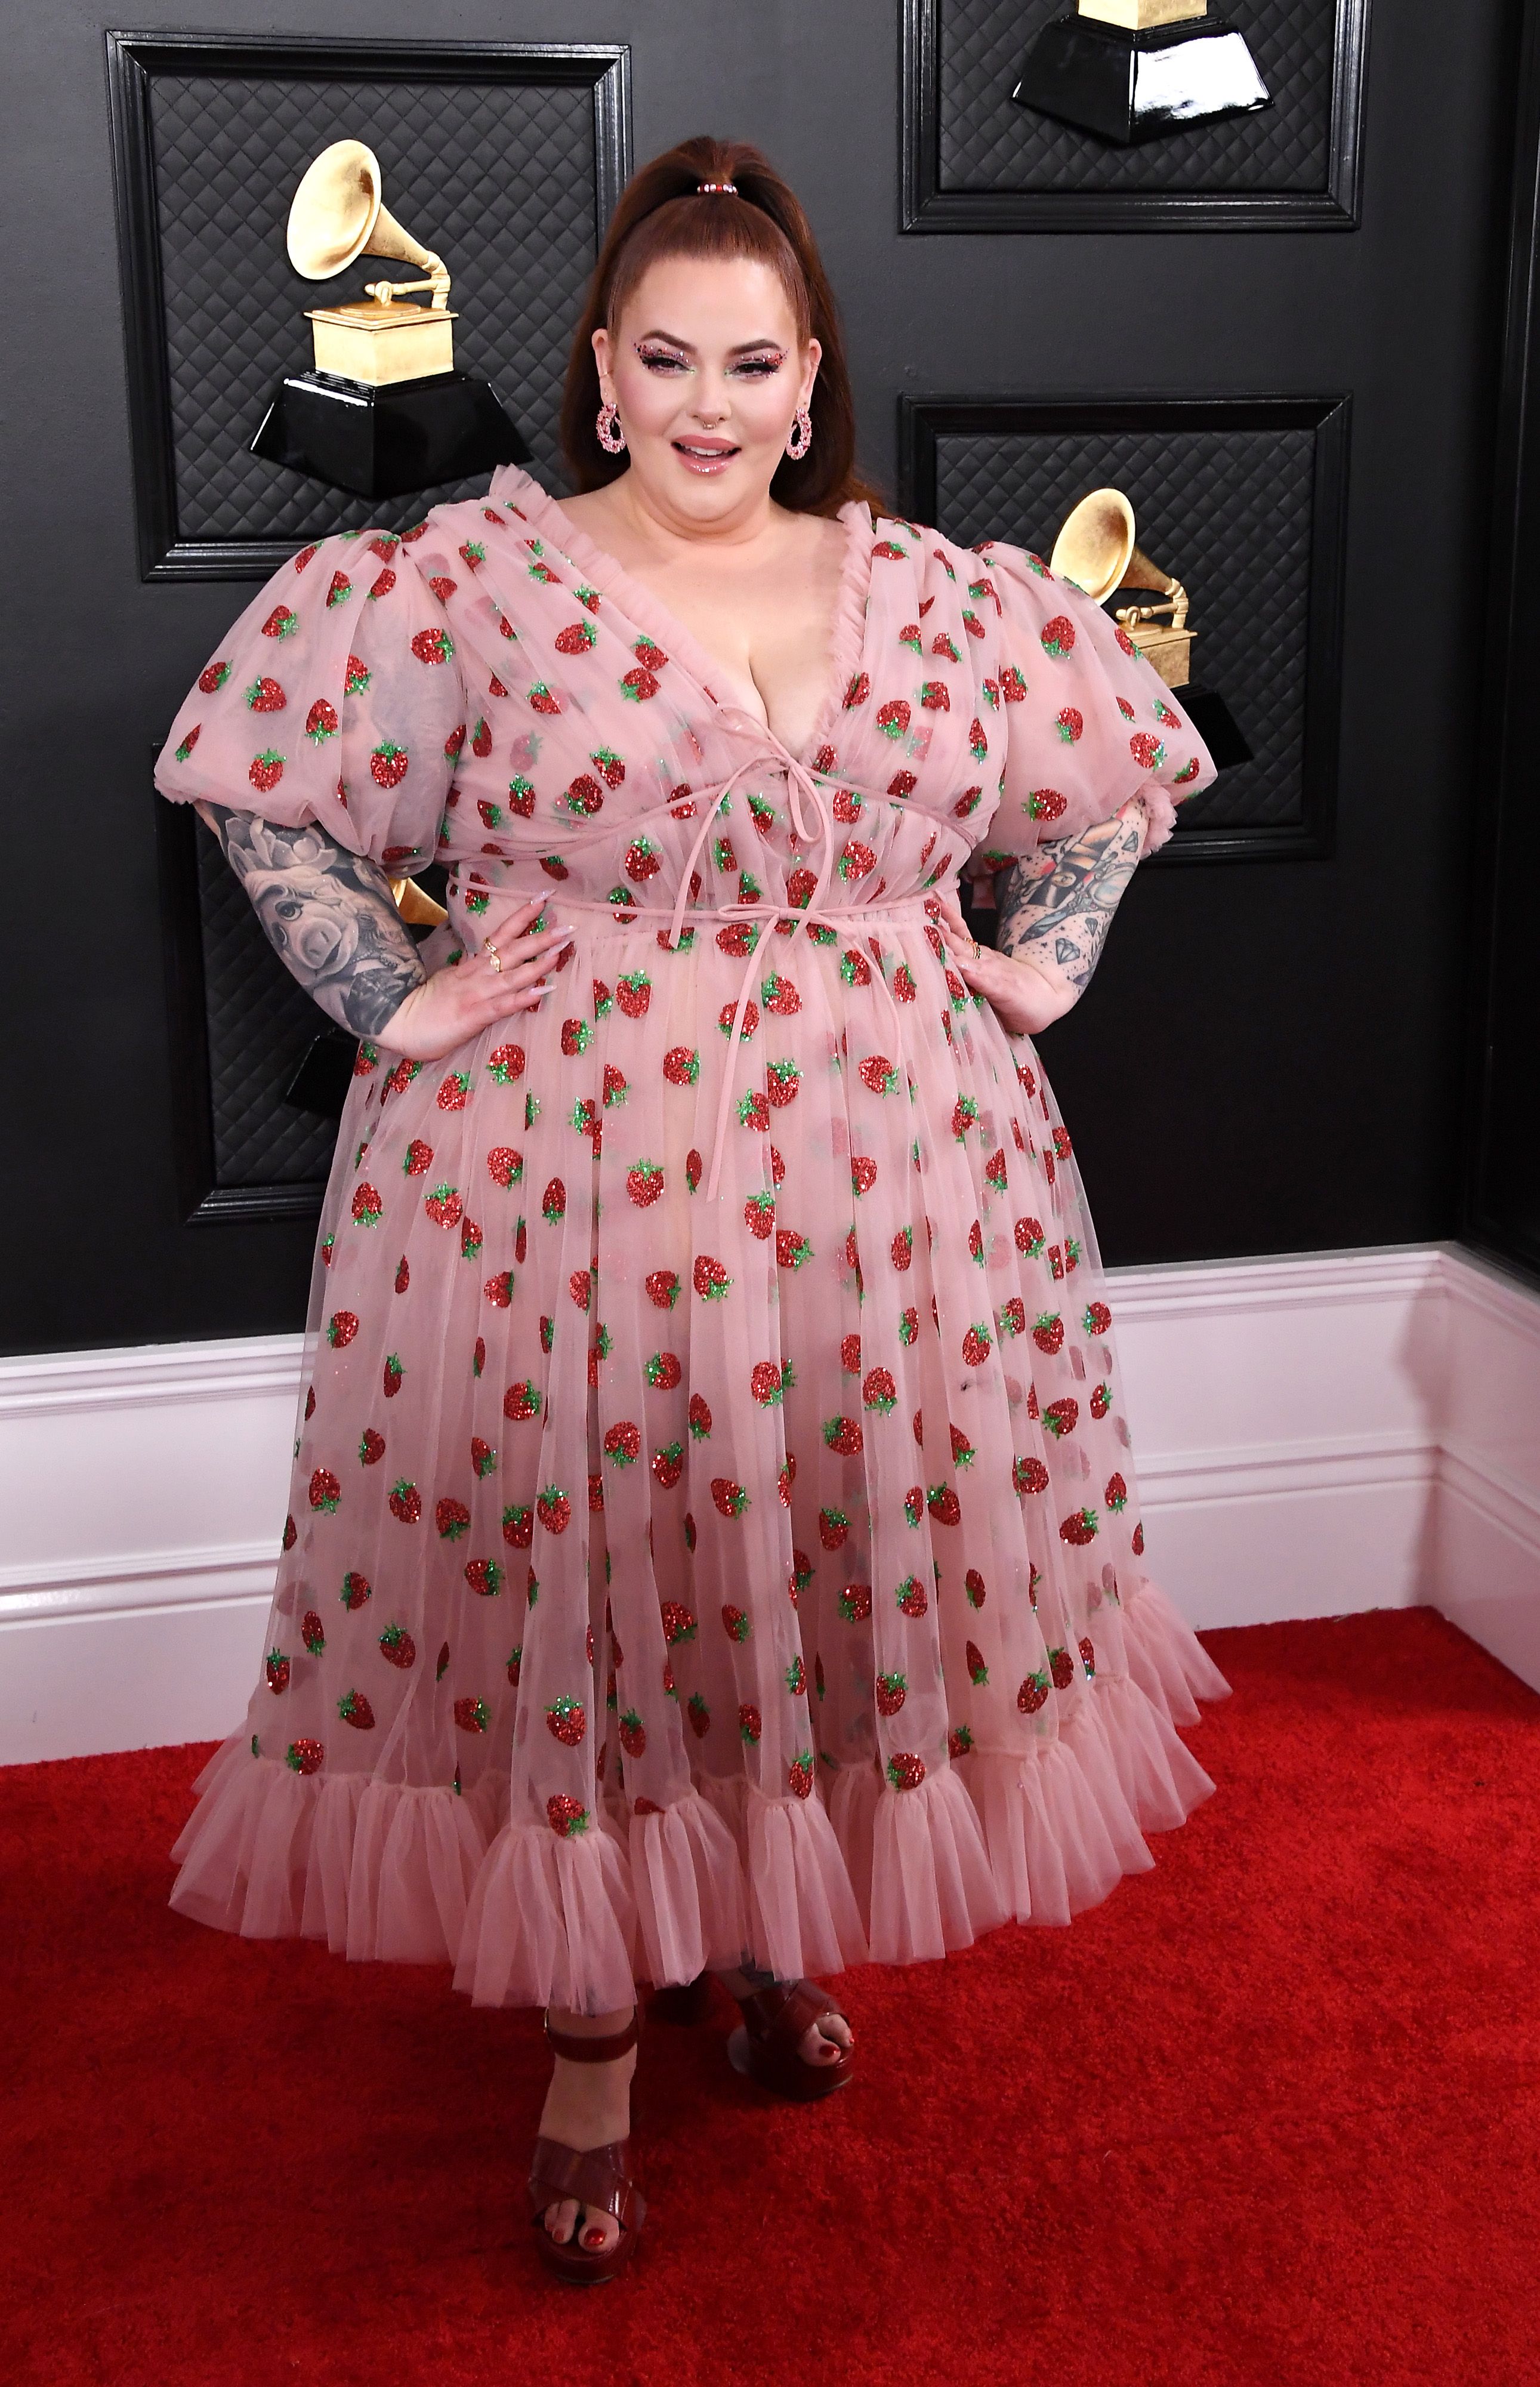 https://hips.hearstapps.com/hmg-prod/images/tess-holliday-attends-the-62nd-annual-grammy-awards-at-news-photo-1580081075.jpg